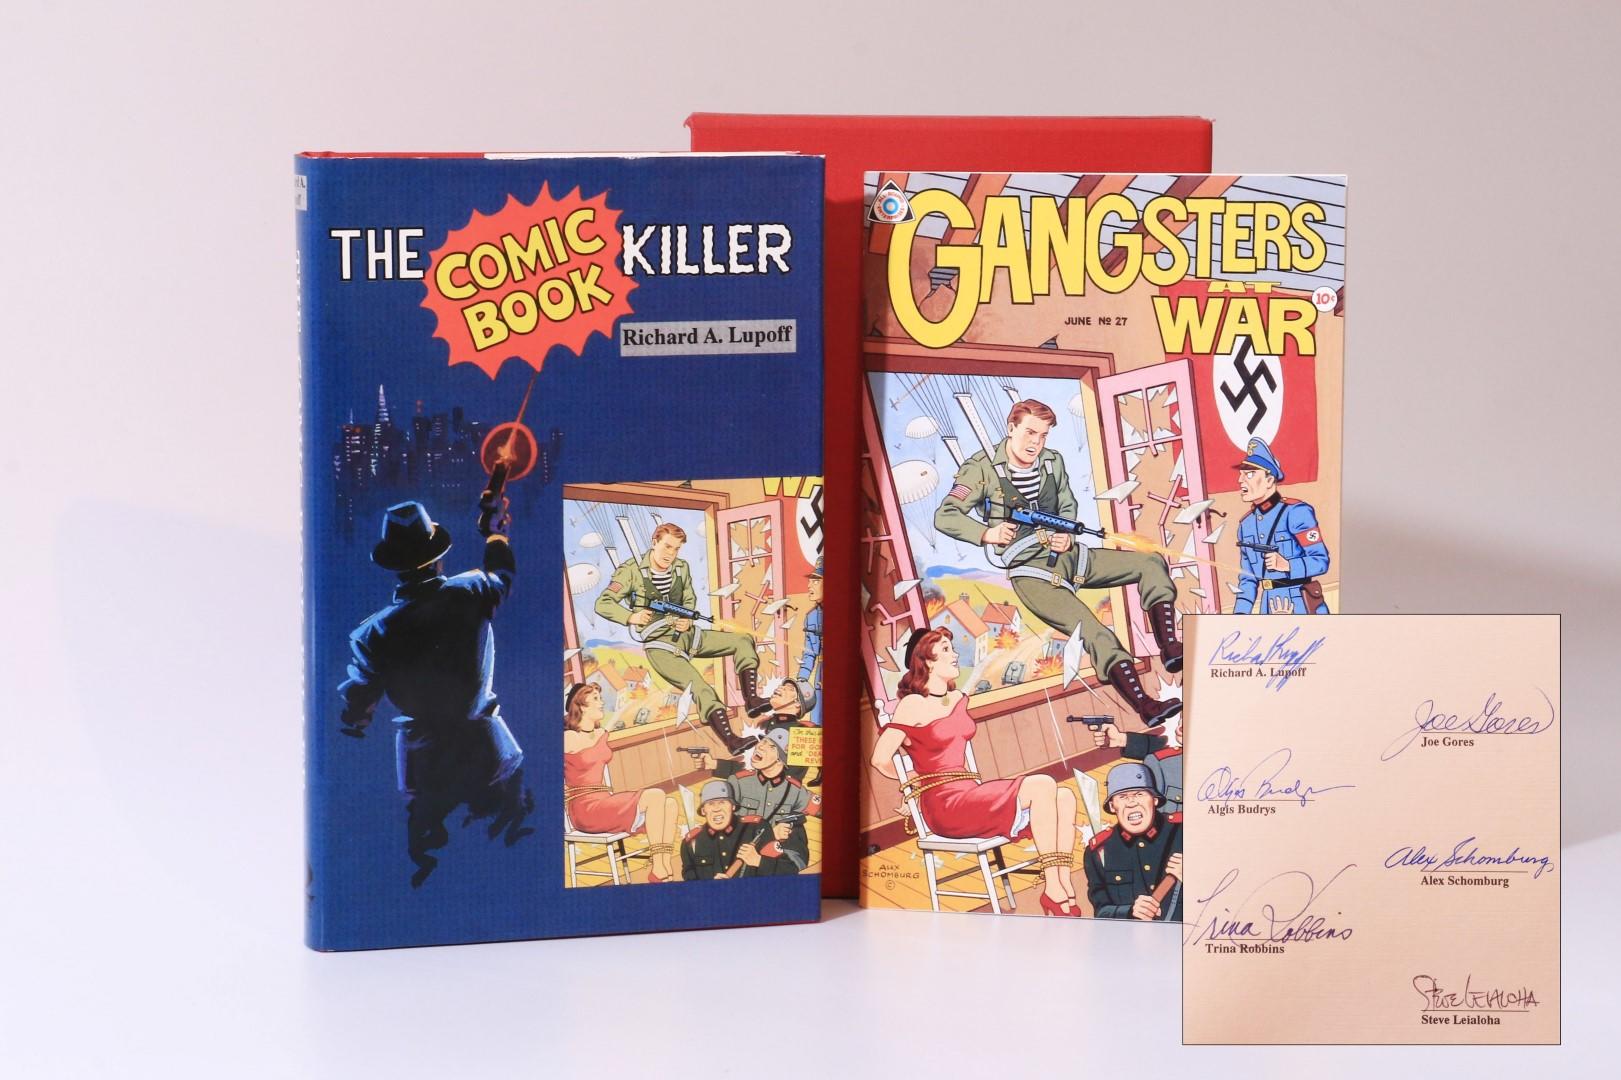 Richard Lupoff - The Comic Book Killer - Offspring Press, 1988, Limited Edition.  Signed